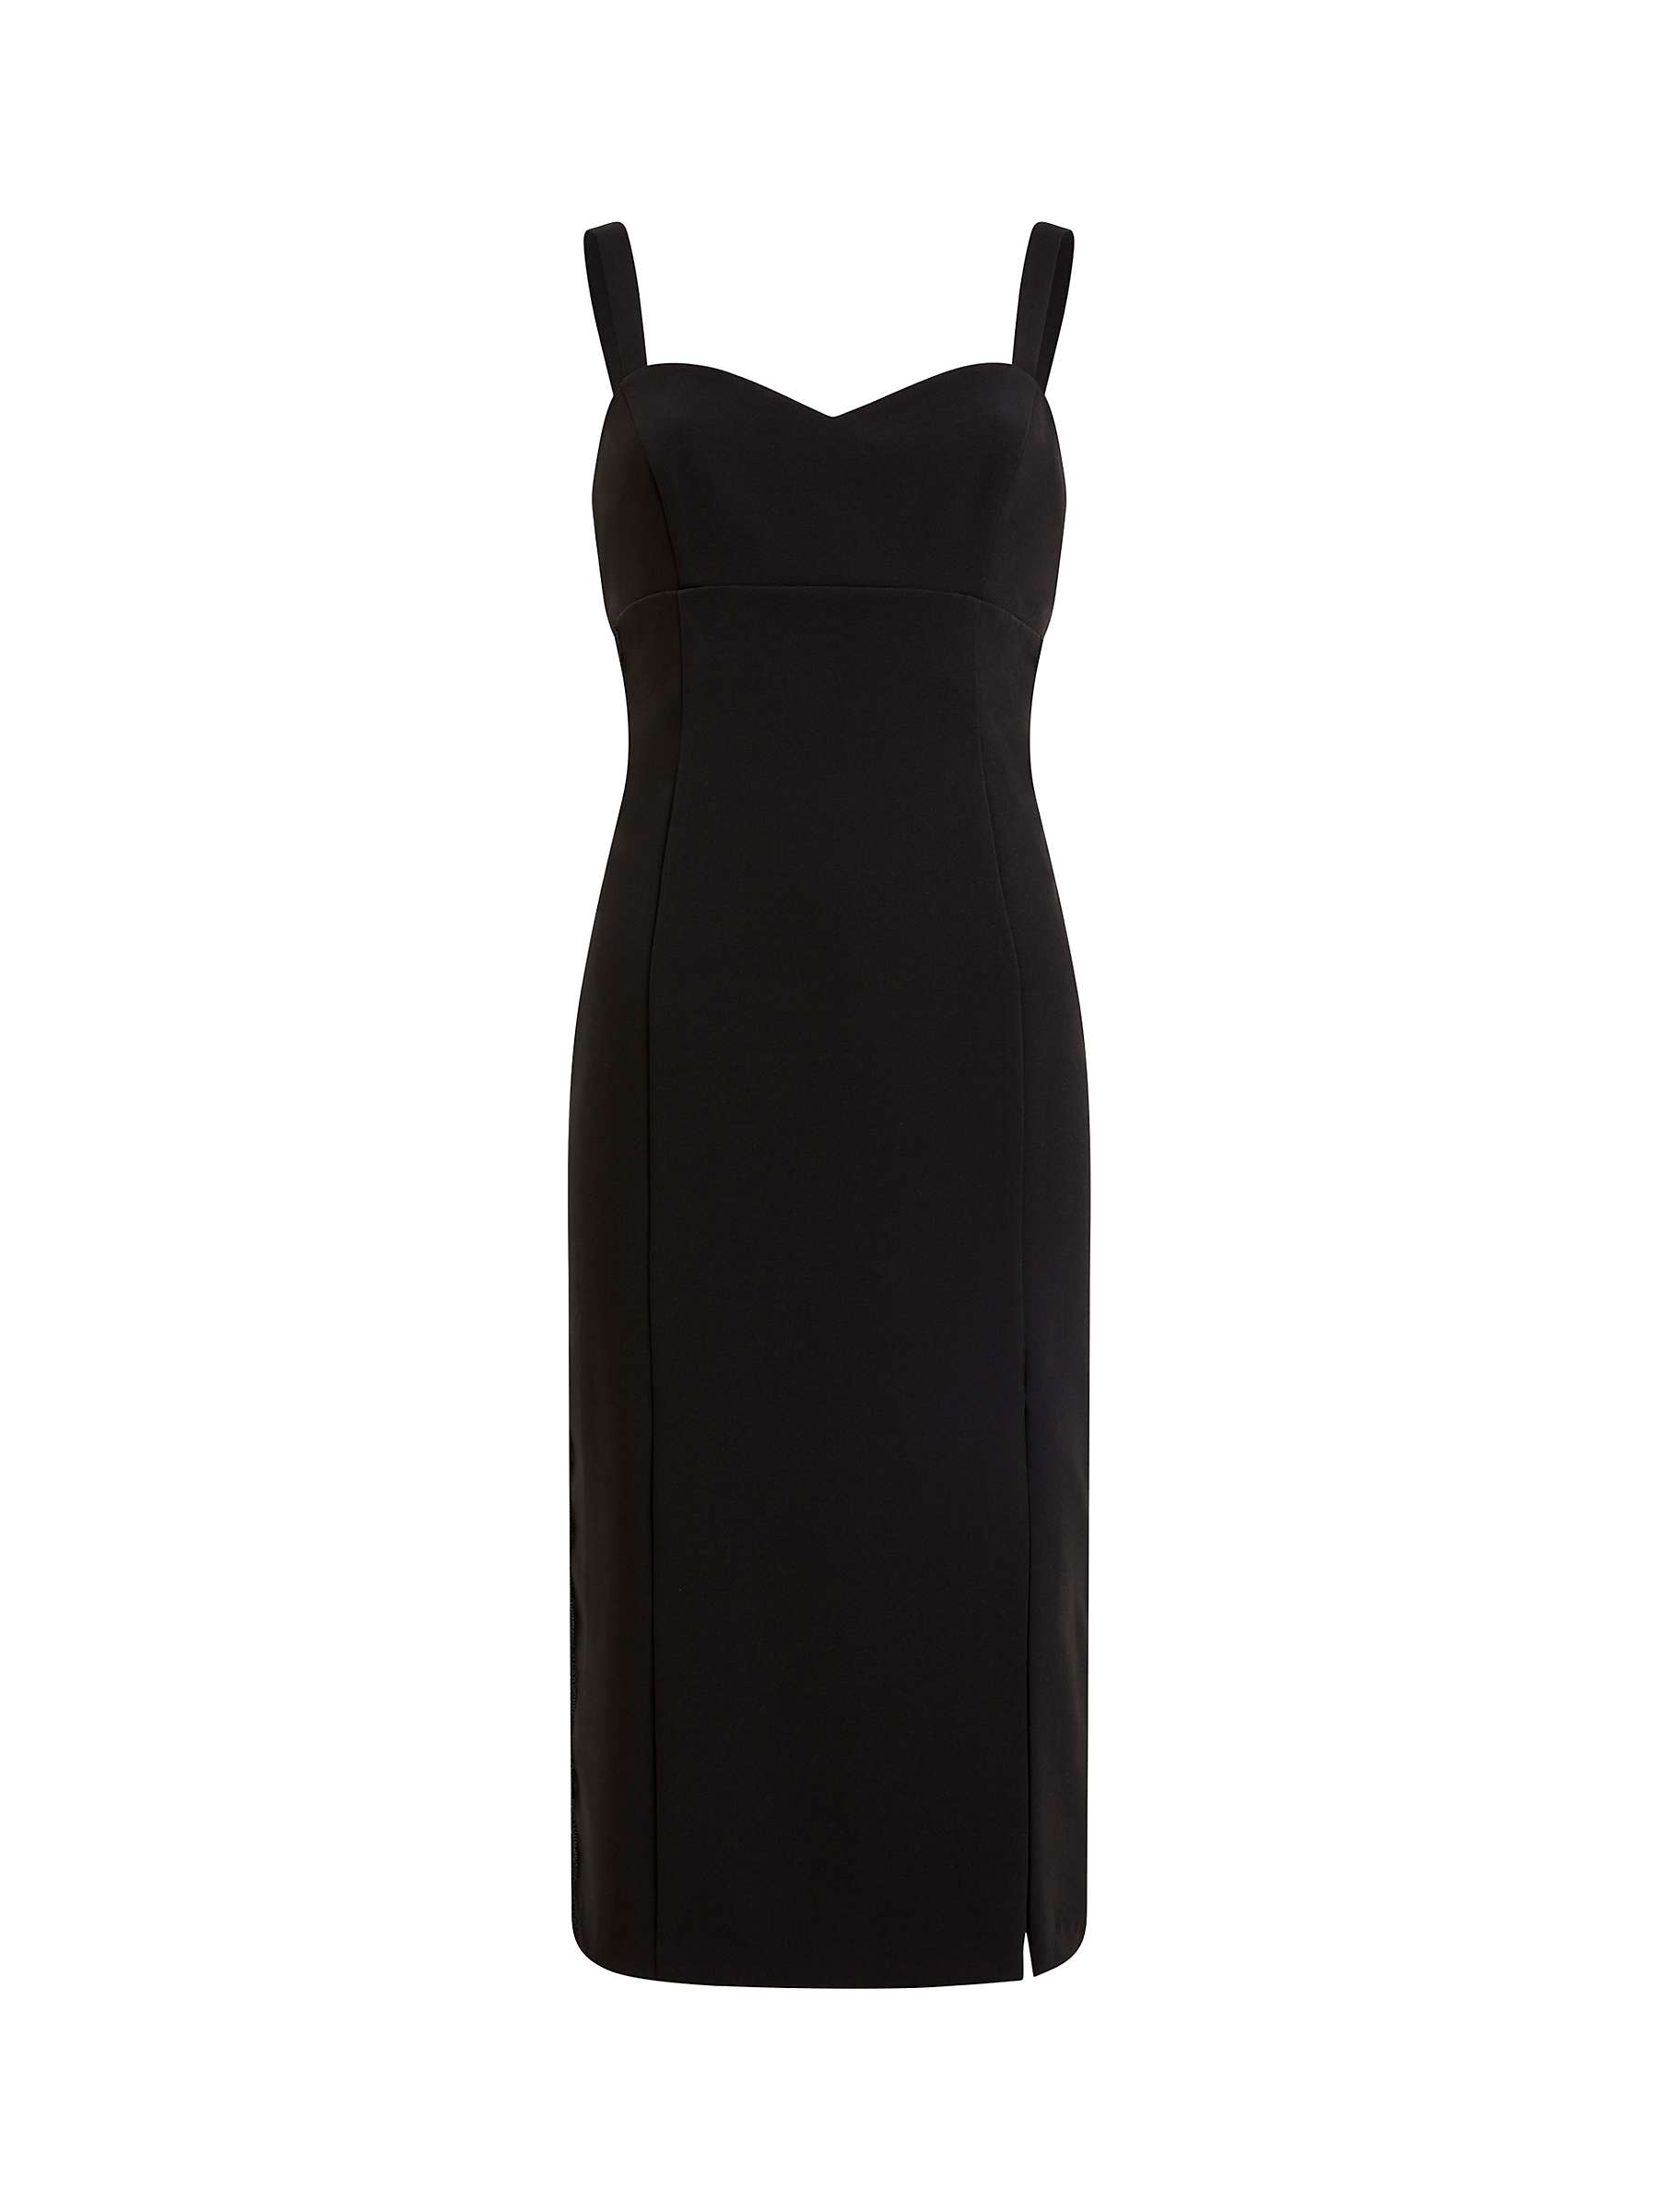 Buy French Connection Echo Sheath Midi Dress, Blackout Online at johnlewis.com